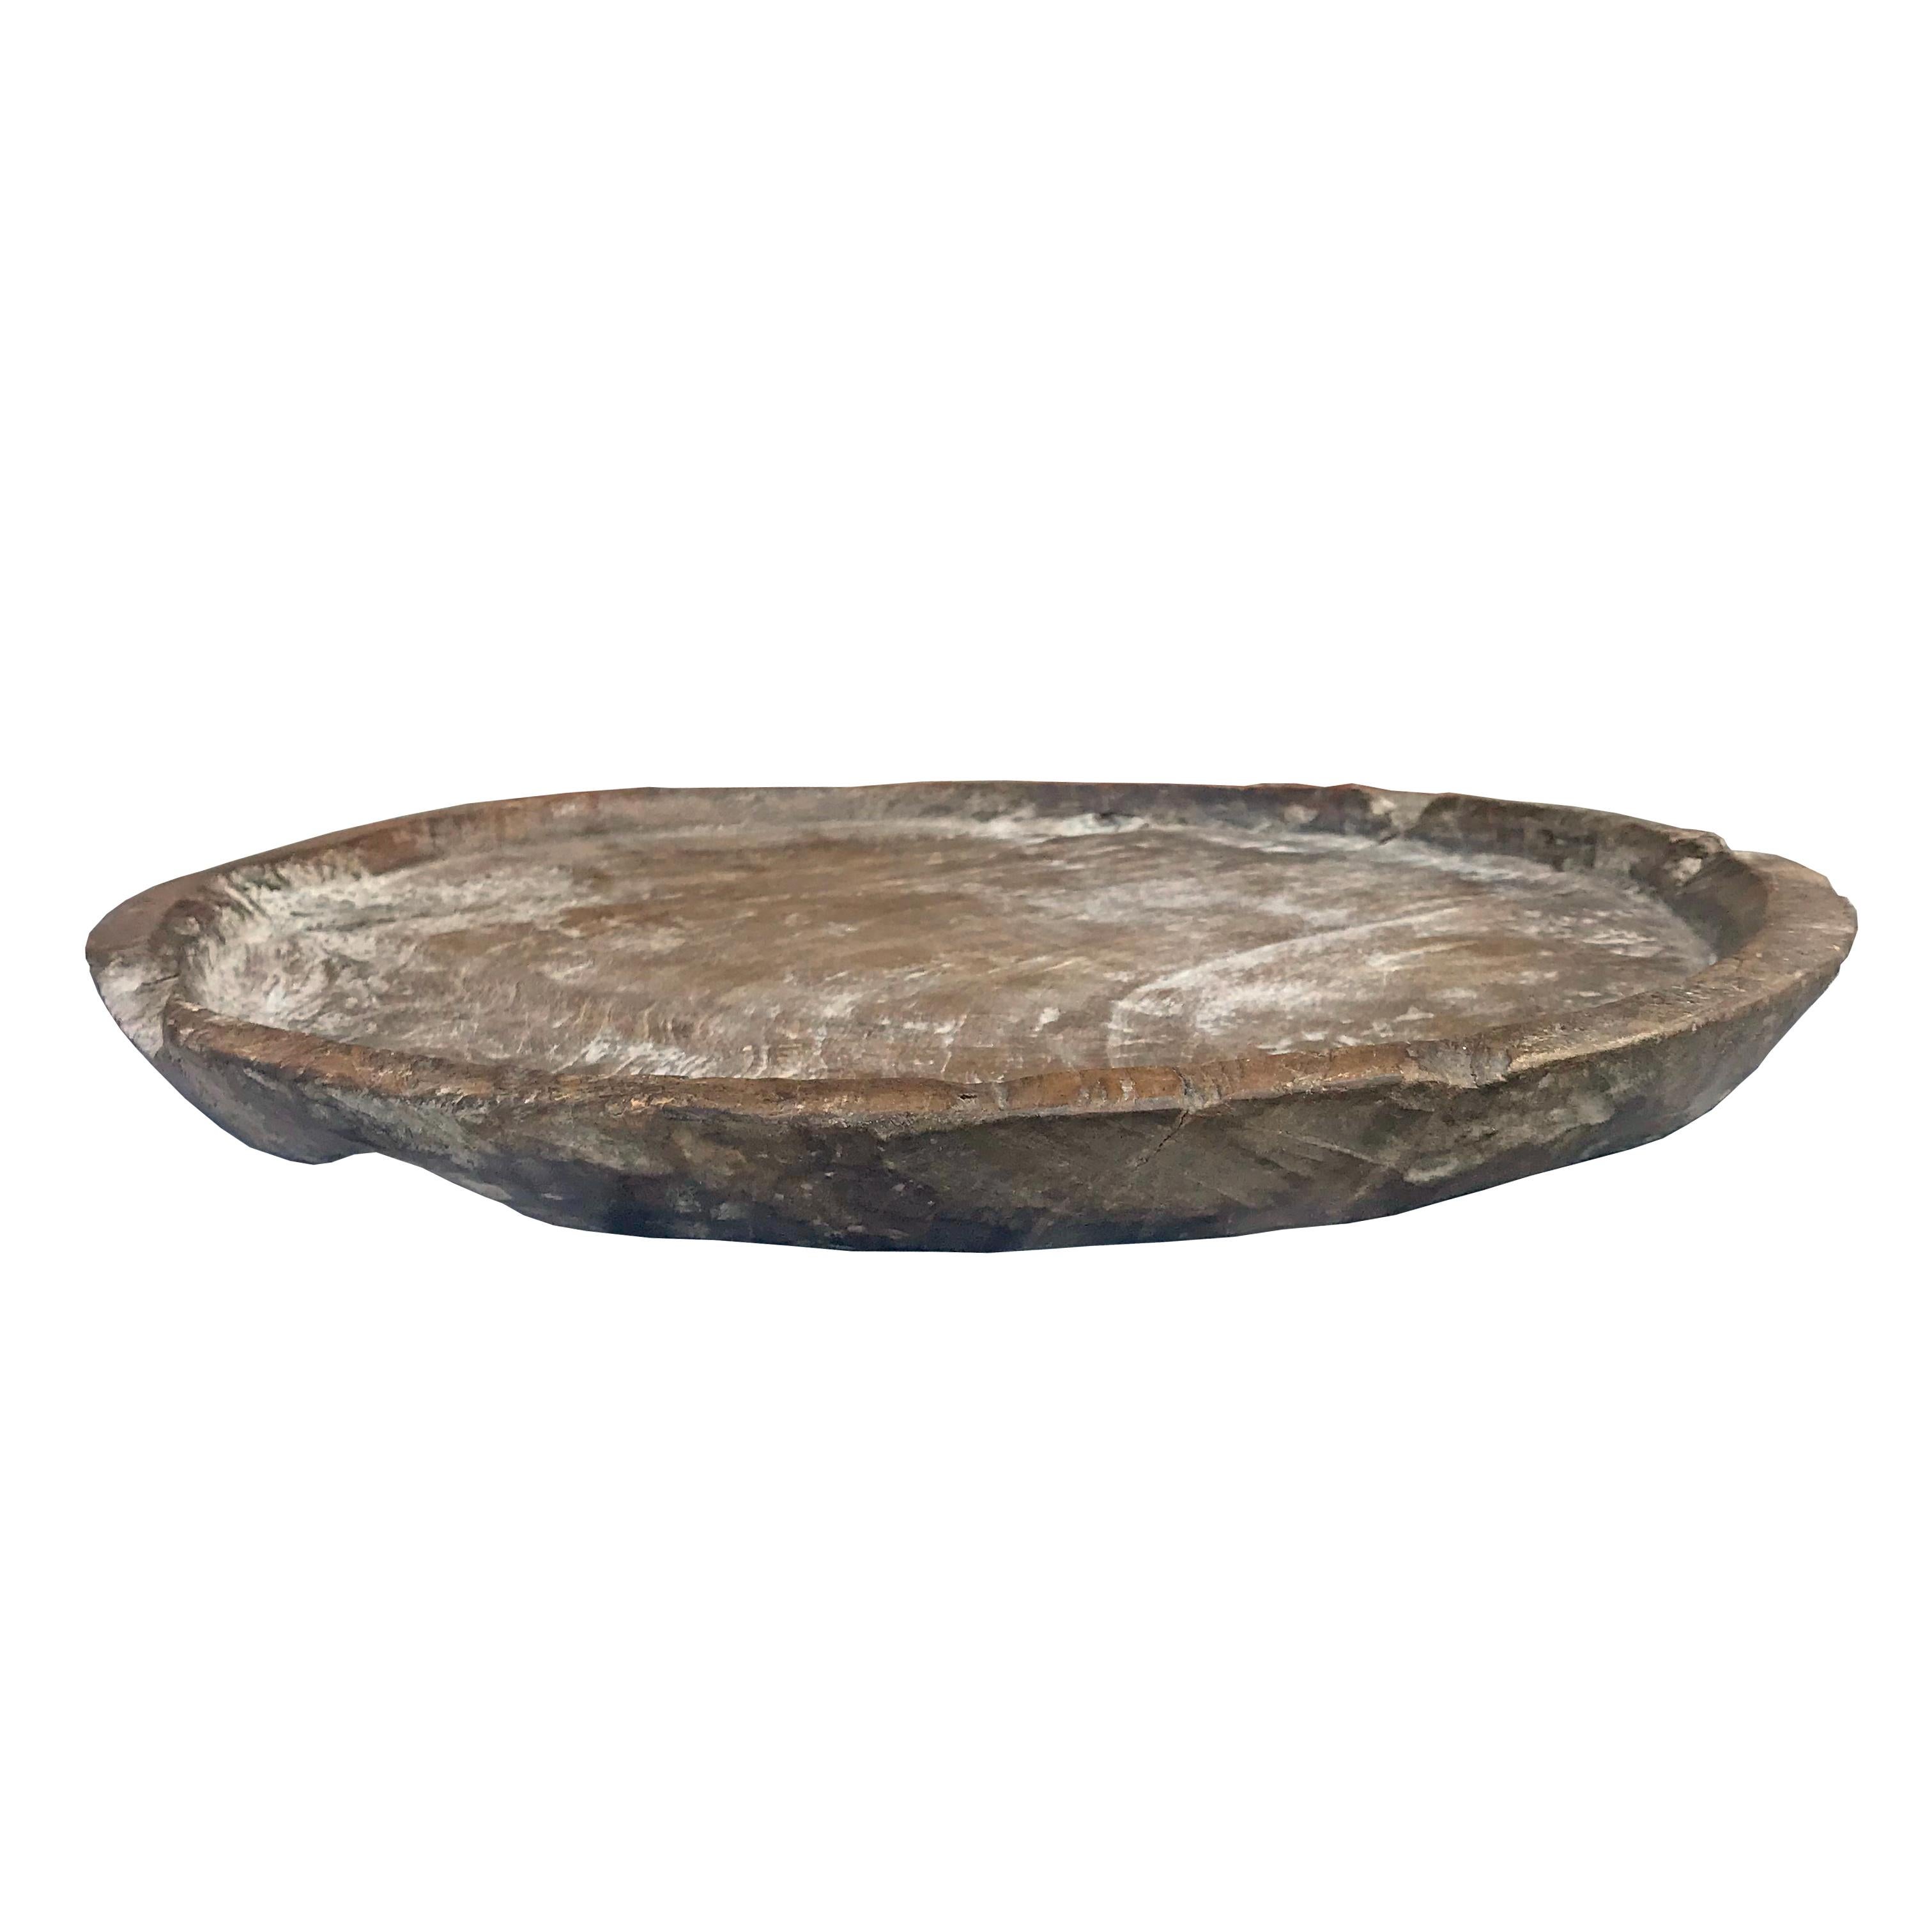 An incredible 19th century carved burl wood tray with a rustic live edge with shallow lip, a well worn finish, and a small hole at one side. The finish on this piece is amazing!